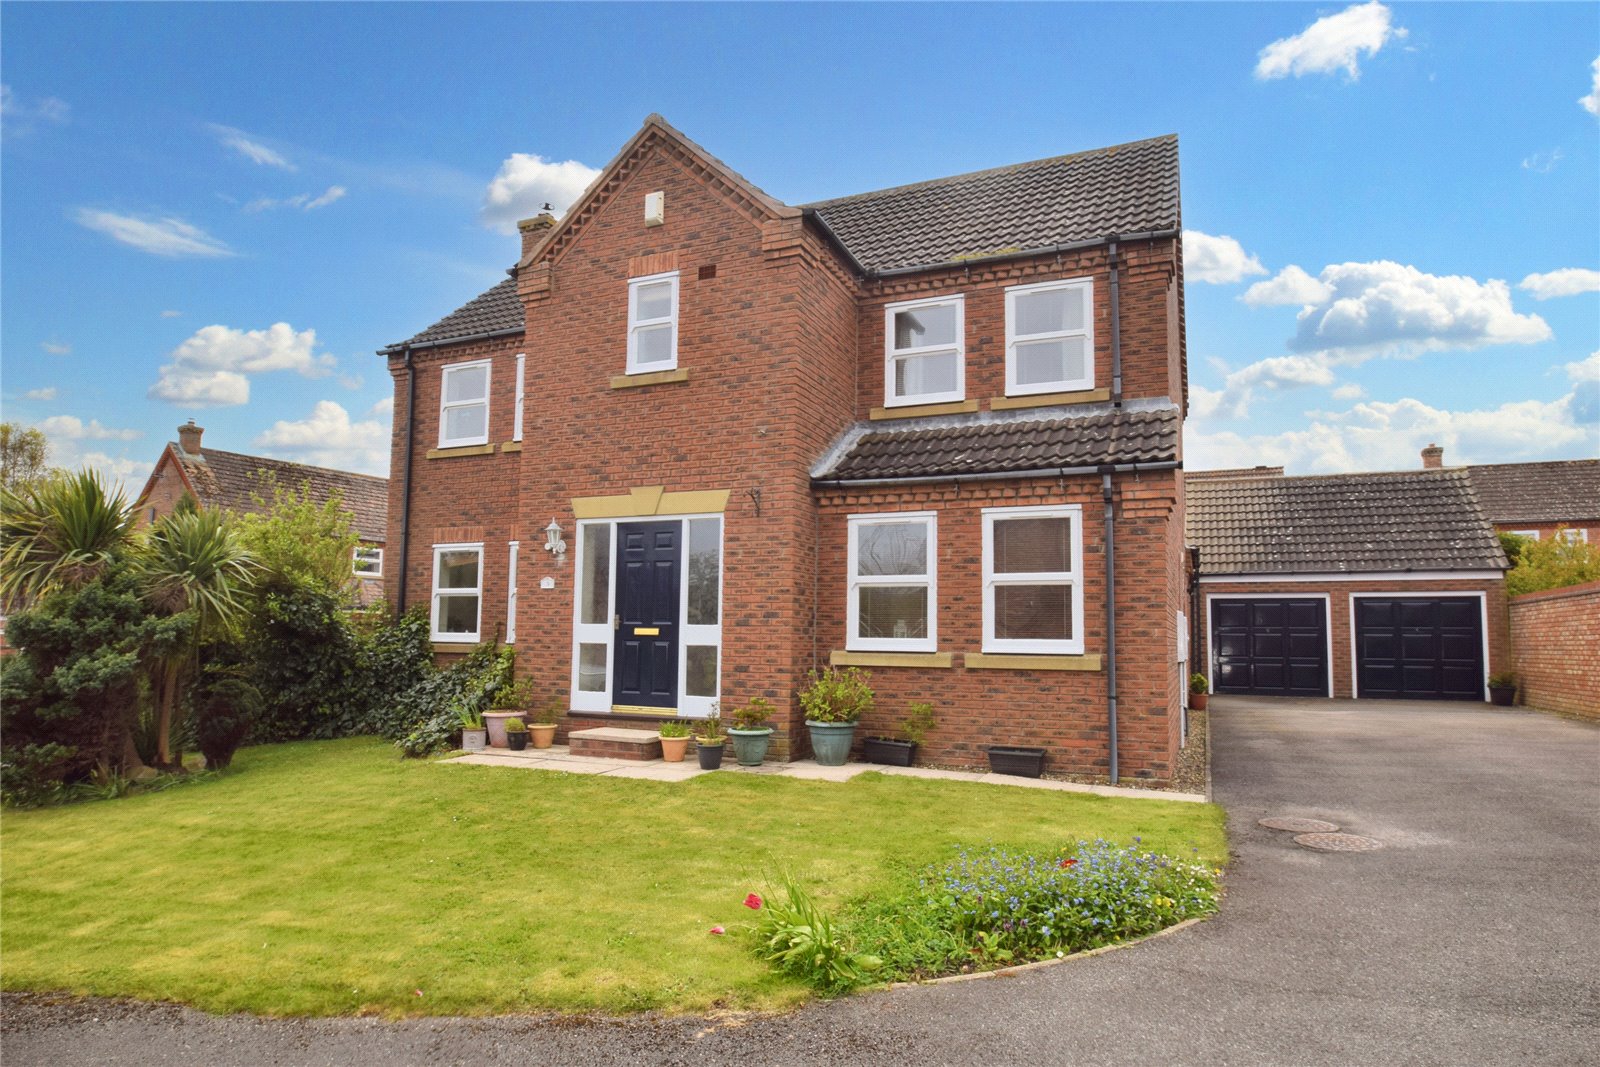 4 bed house for sale in Ivy Bank Court, Scalby - Property Image 1